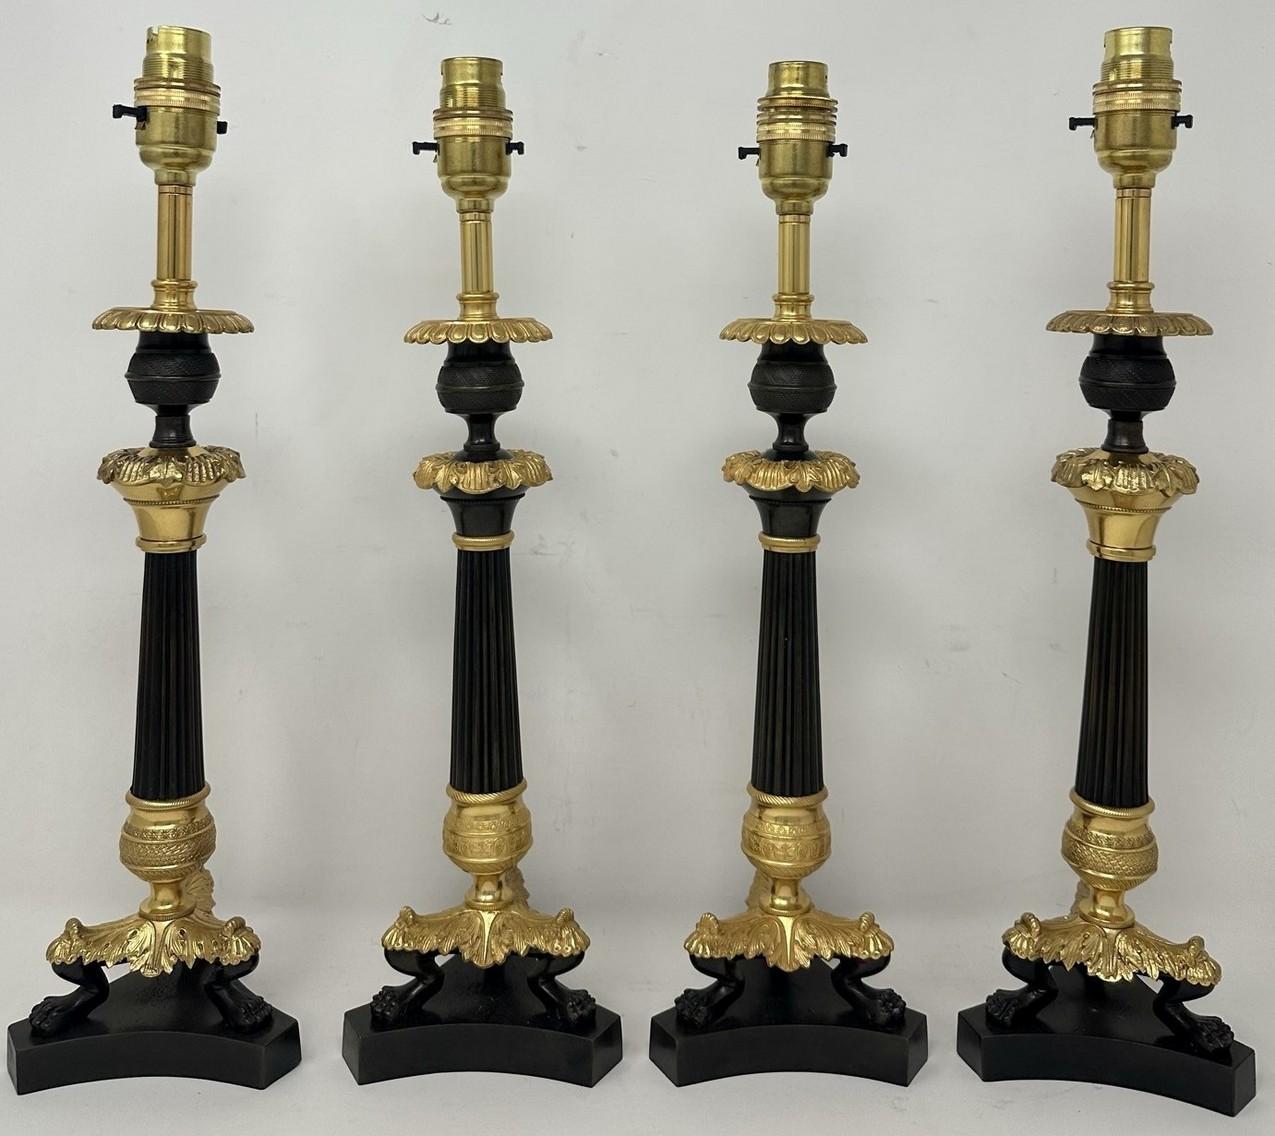 An Exceptionally Fine and quite rare Set of Four (two identical pairs) French Ormolu and patinated Bronze early Victorian Single Light Candlesticks of tall slender form and fairly standard lamp proportions, now converted to a Stunning set of four